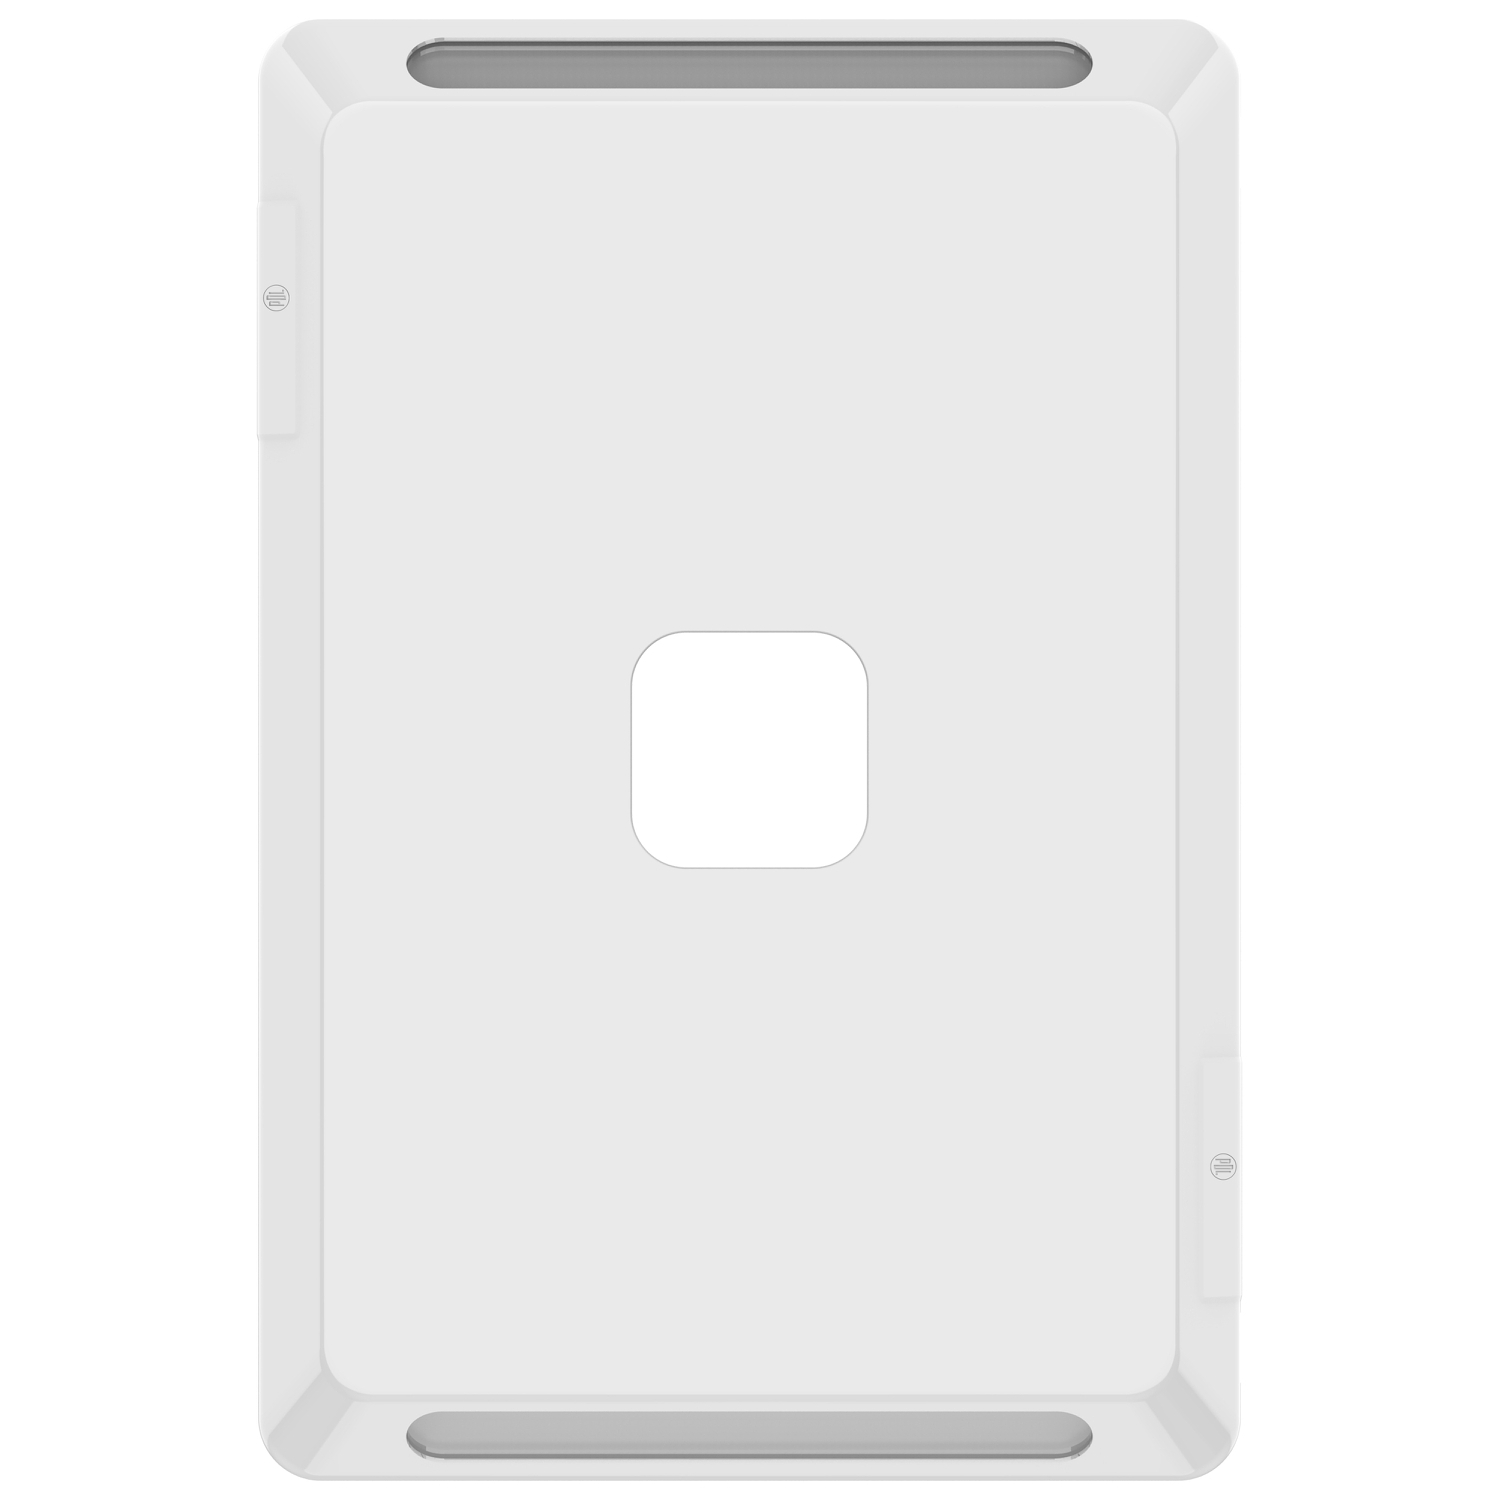 PDL Pro Series - Grid + Cover Plate Switch 1-Gang - White